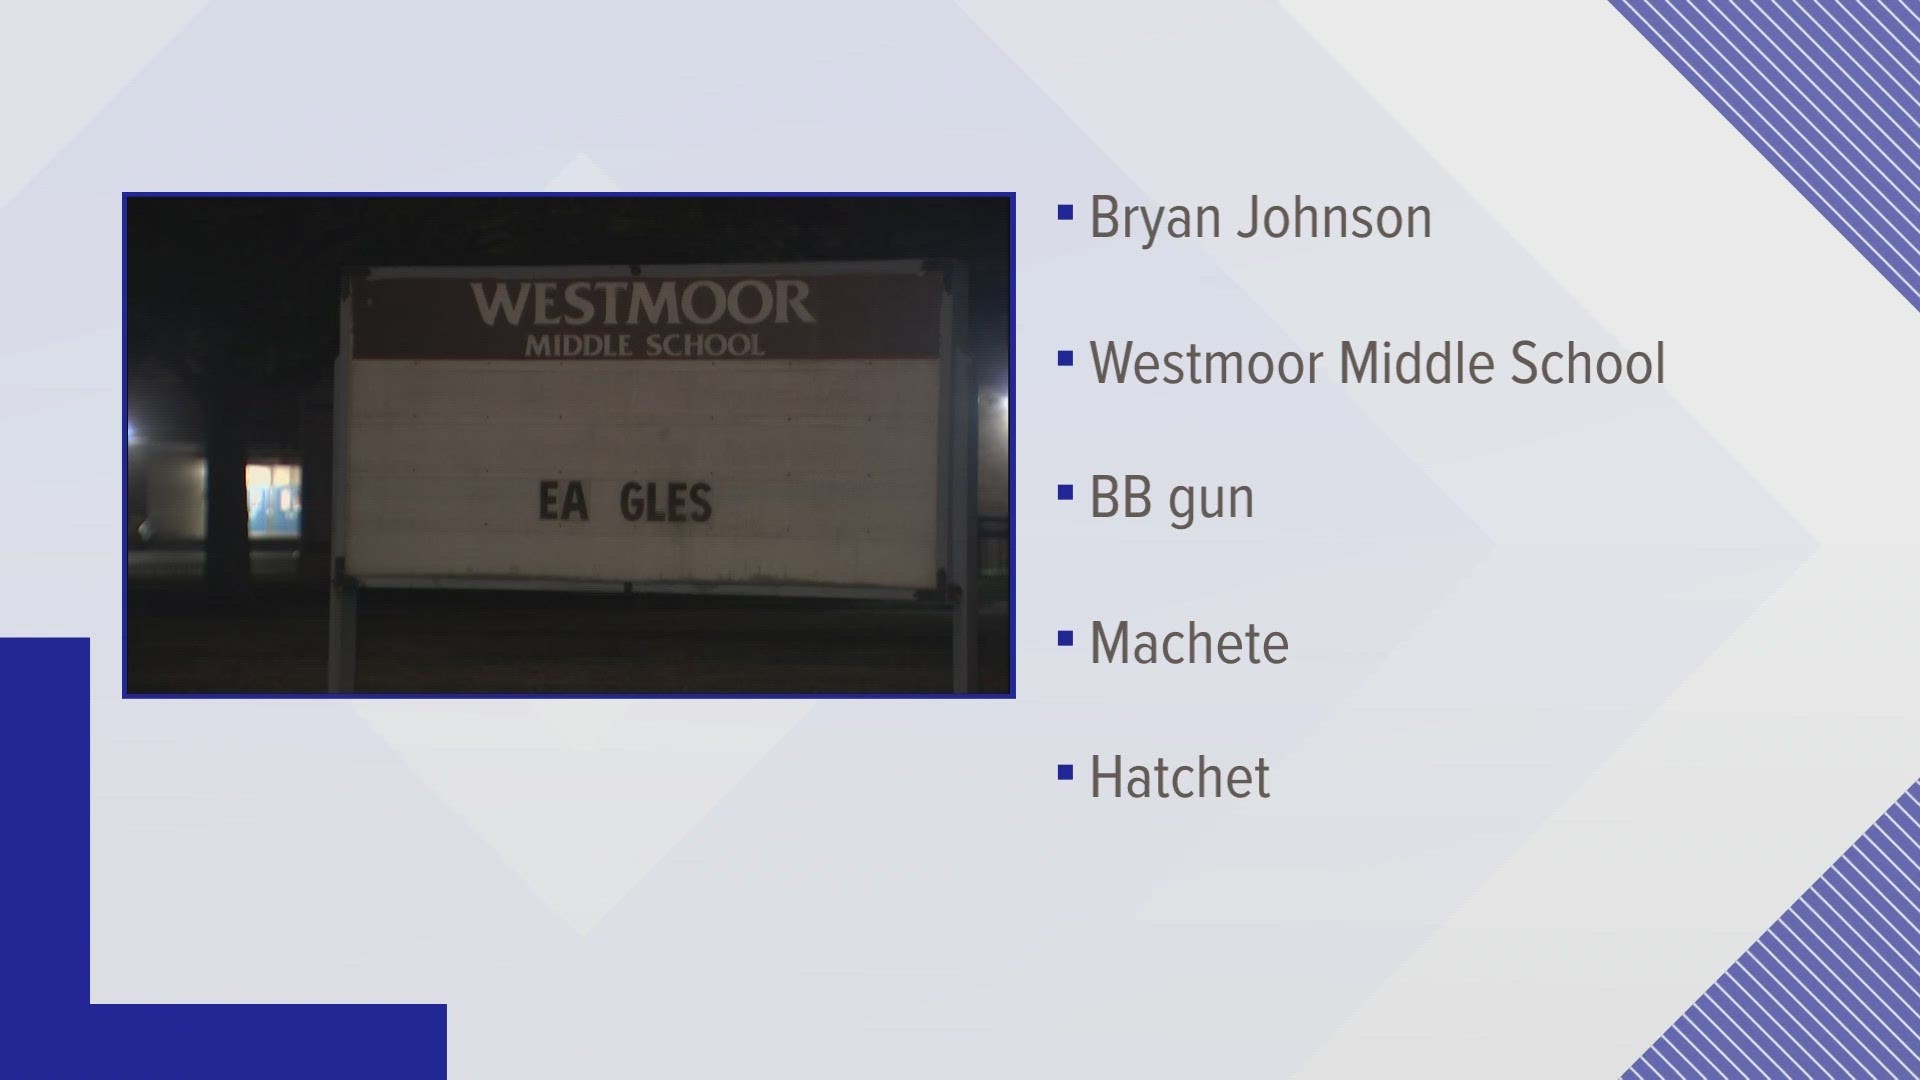 During the investigation, police recovered a machete, a hatchet and a Glock-manufactured BB gun from Johnson's vehicle that was parked at the school.